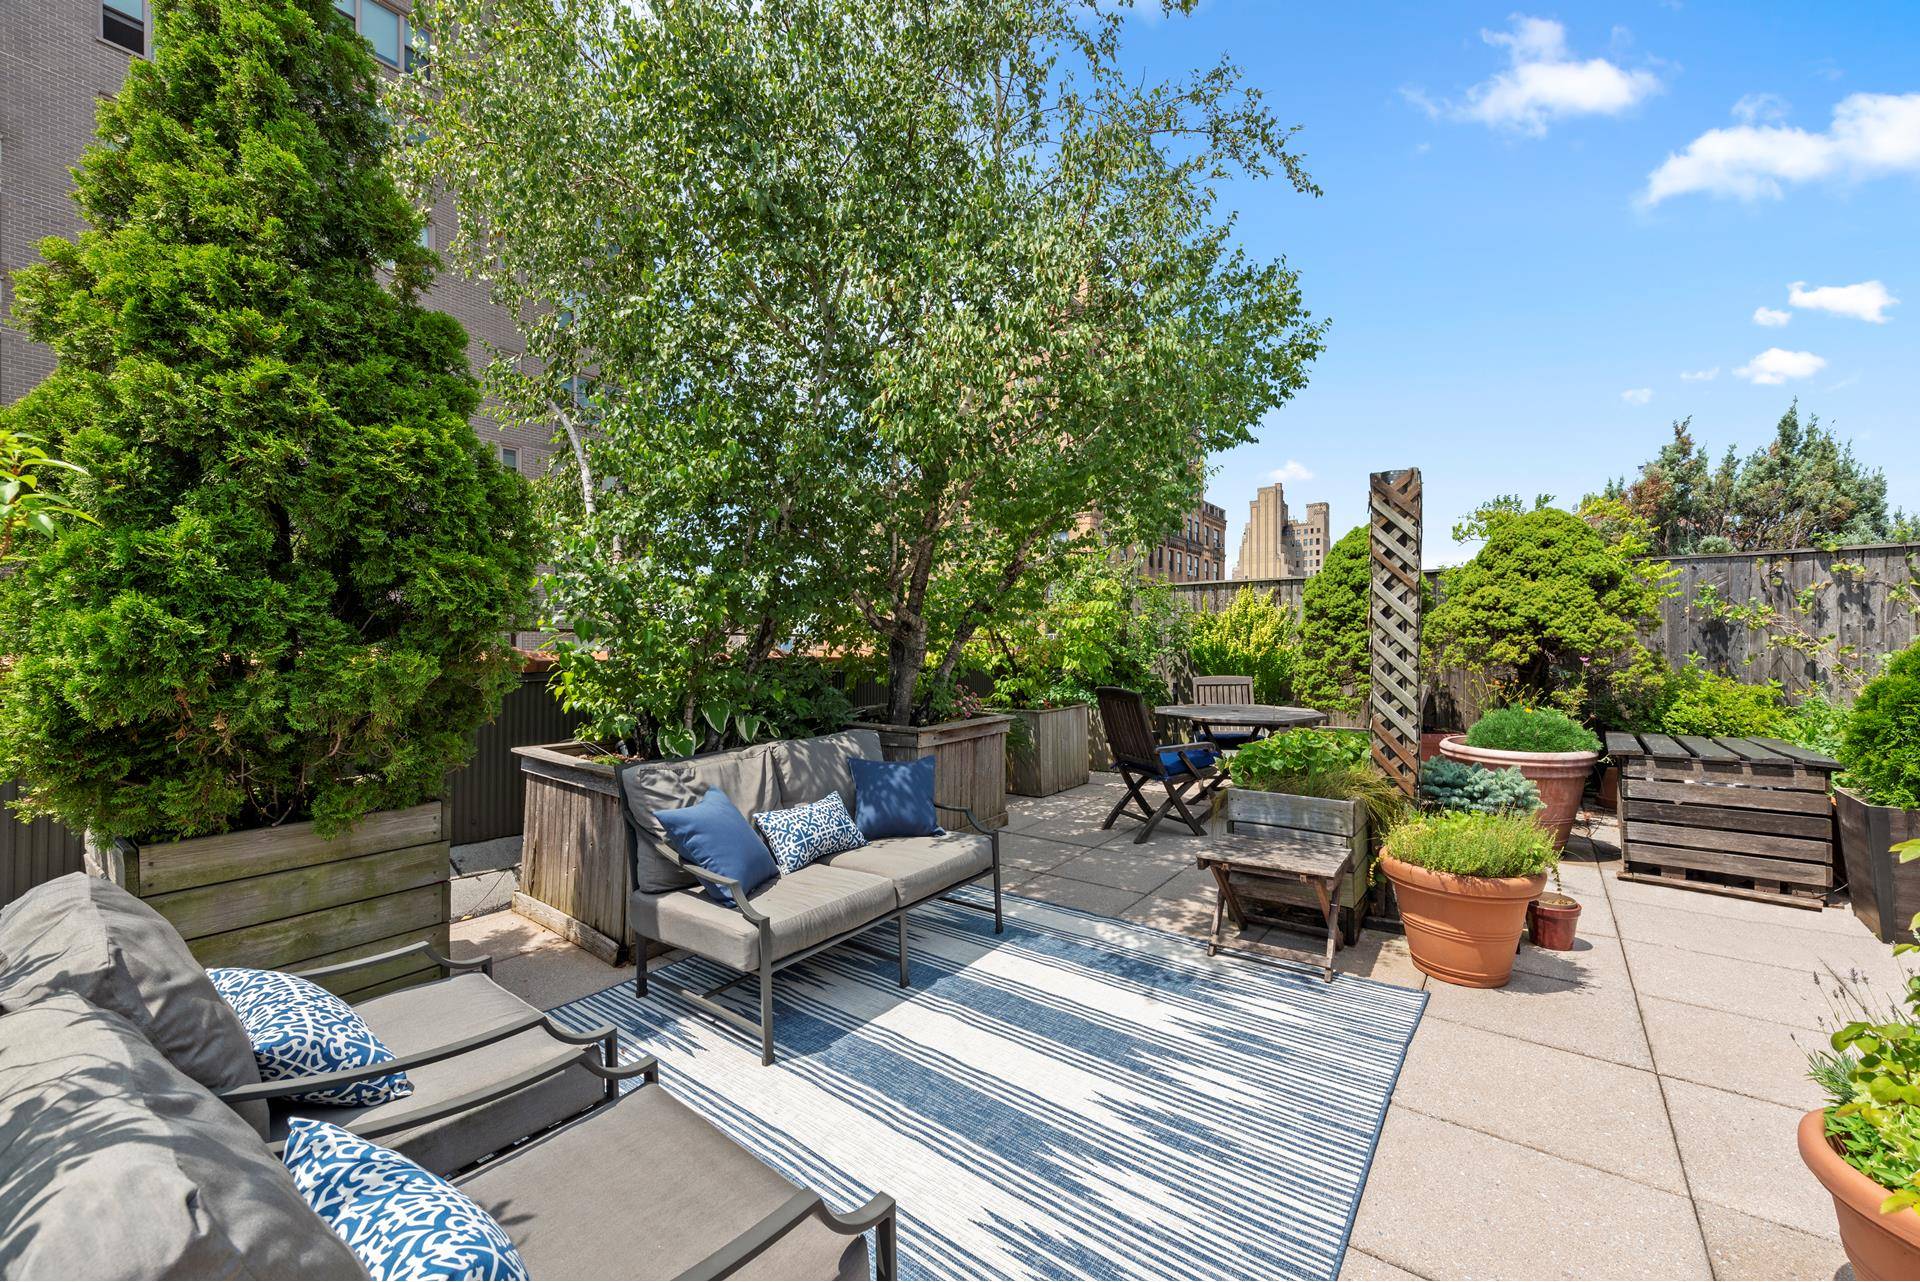 Stunning penthouse three bedroom two bath loft with fireplace, washer and dryer, central air and enormous outdoor paradise that is your very own private roof deck !